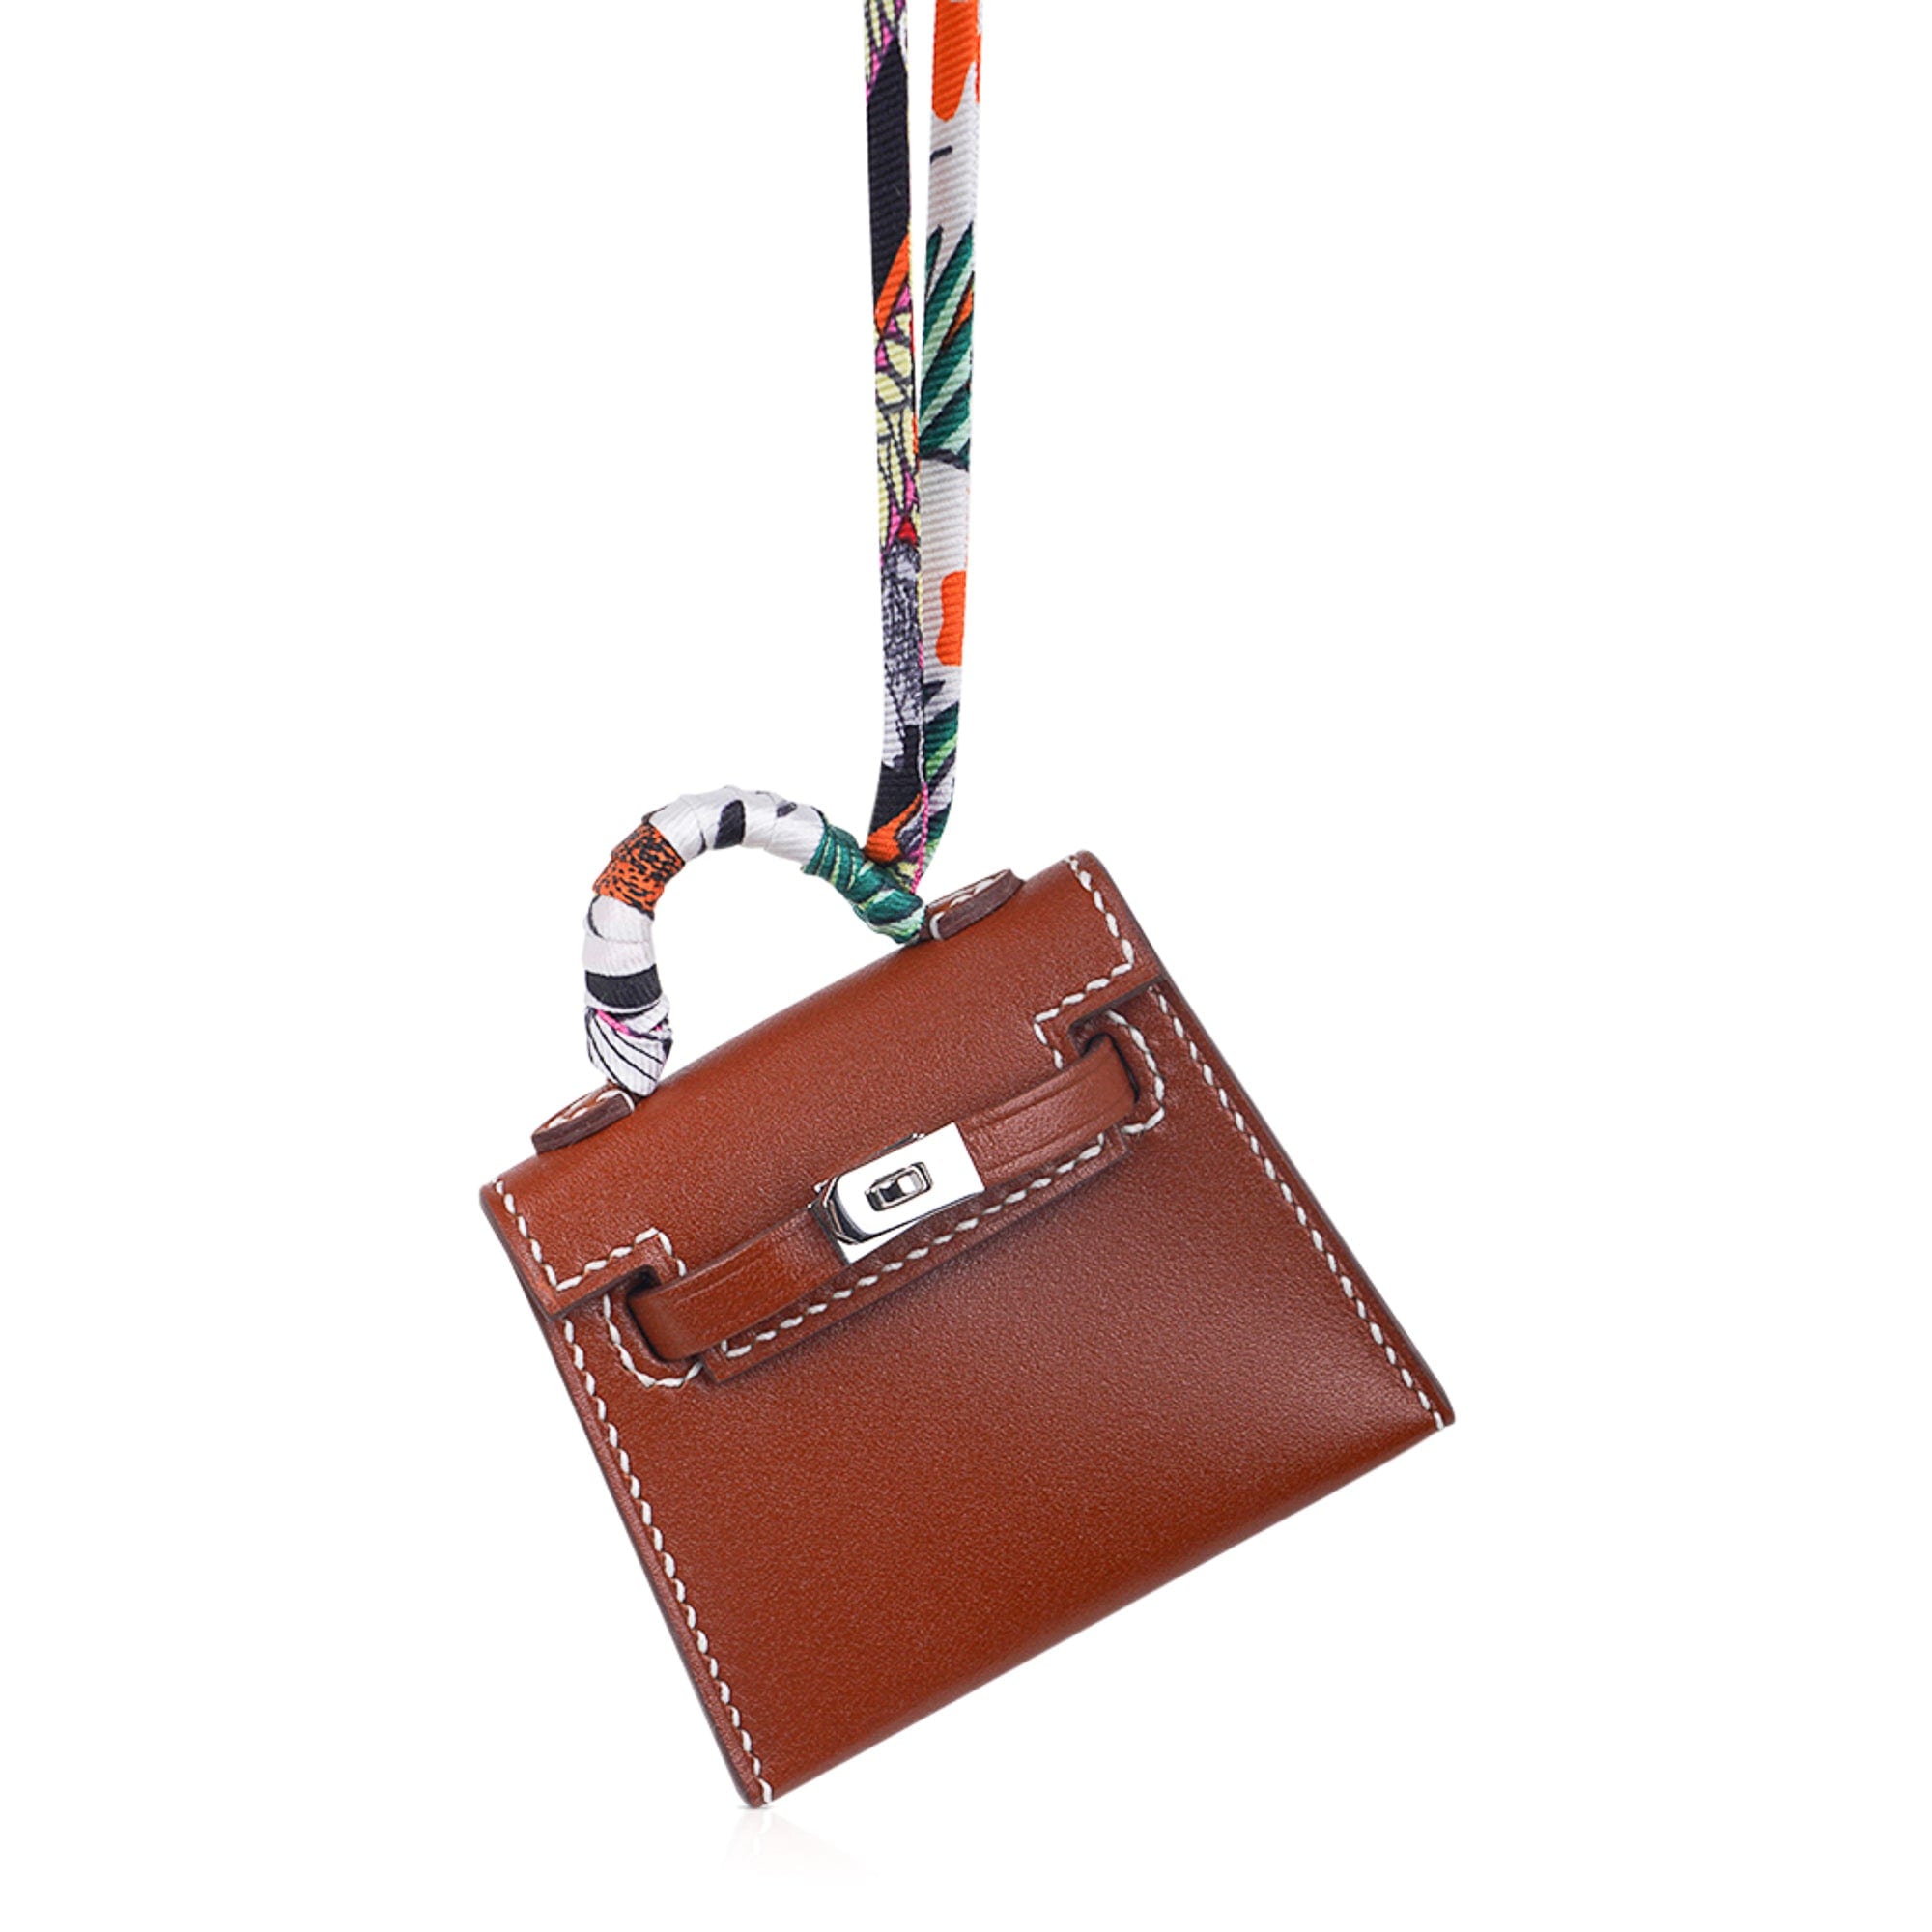 ENTIRE HERMES COLLECTION: BAG CHARMS  RODEO, KELLY TWILLY, ORANGE BAG CHARM  TO DRESS UP YOUR BIRKIN 